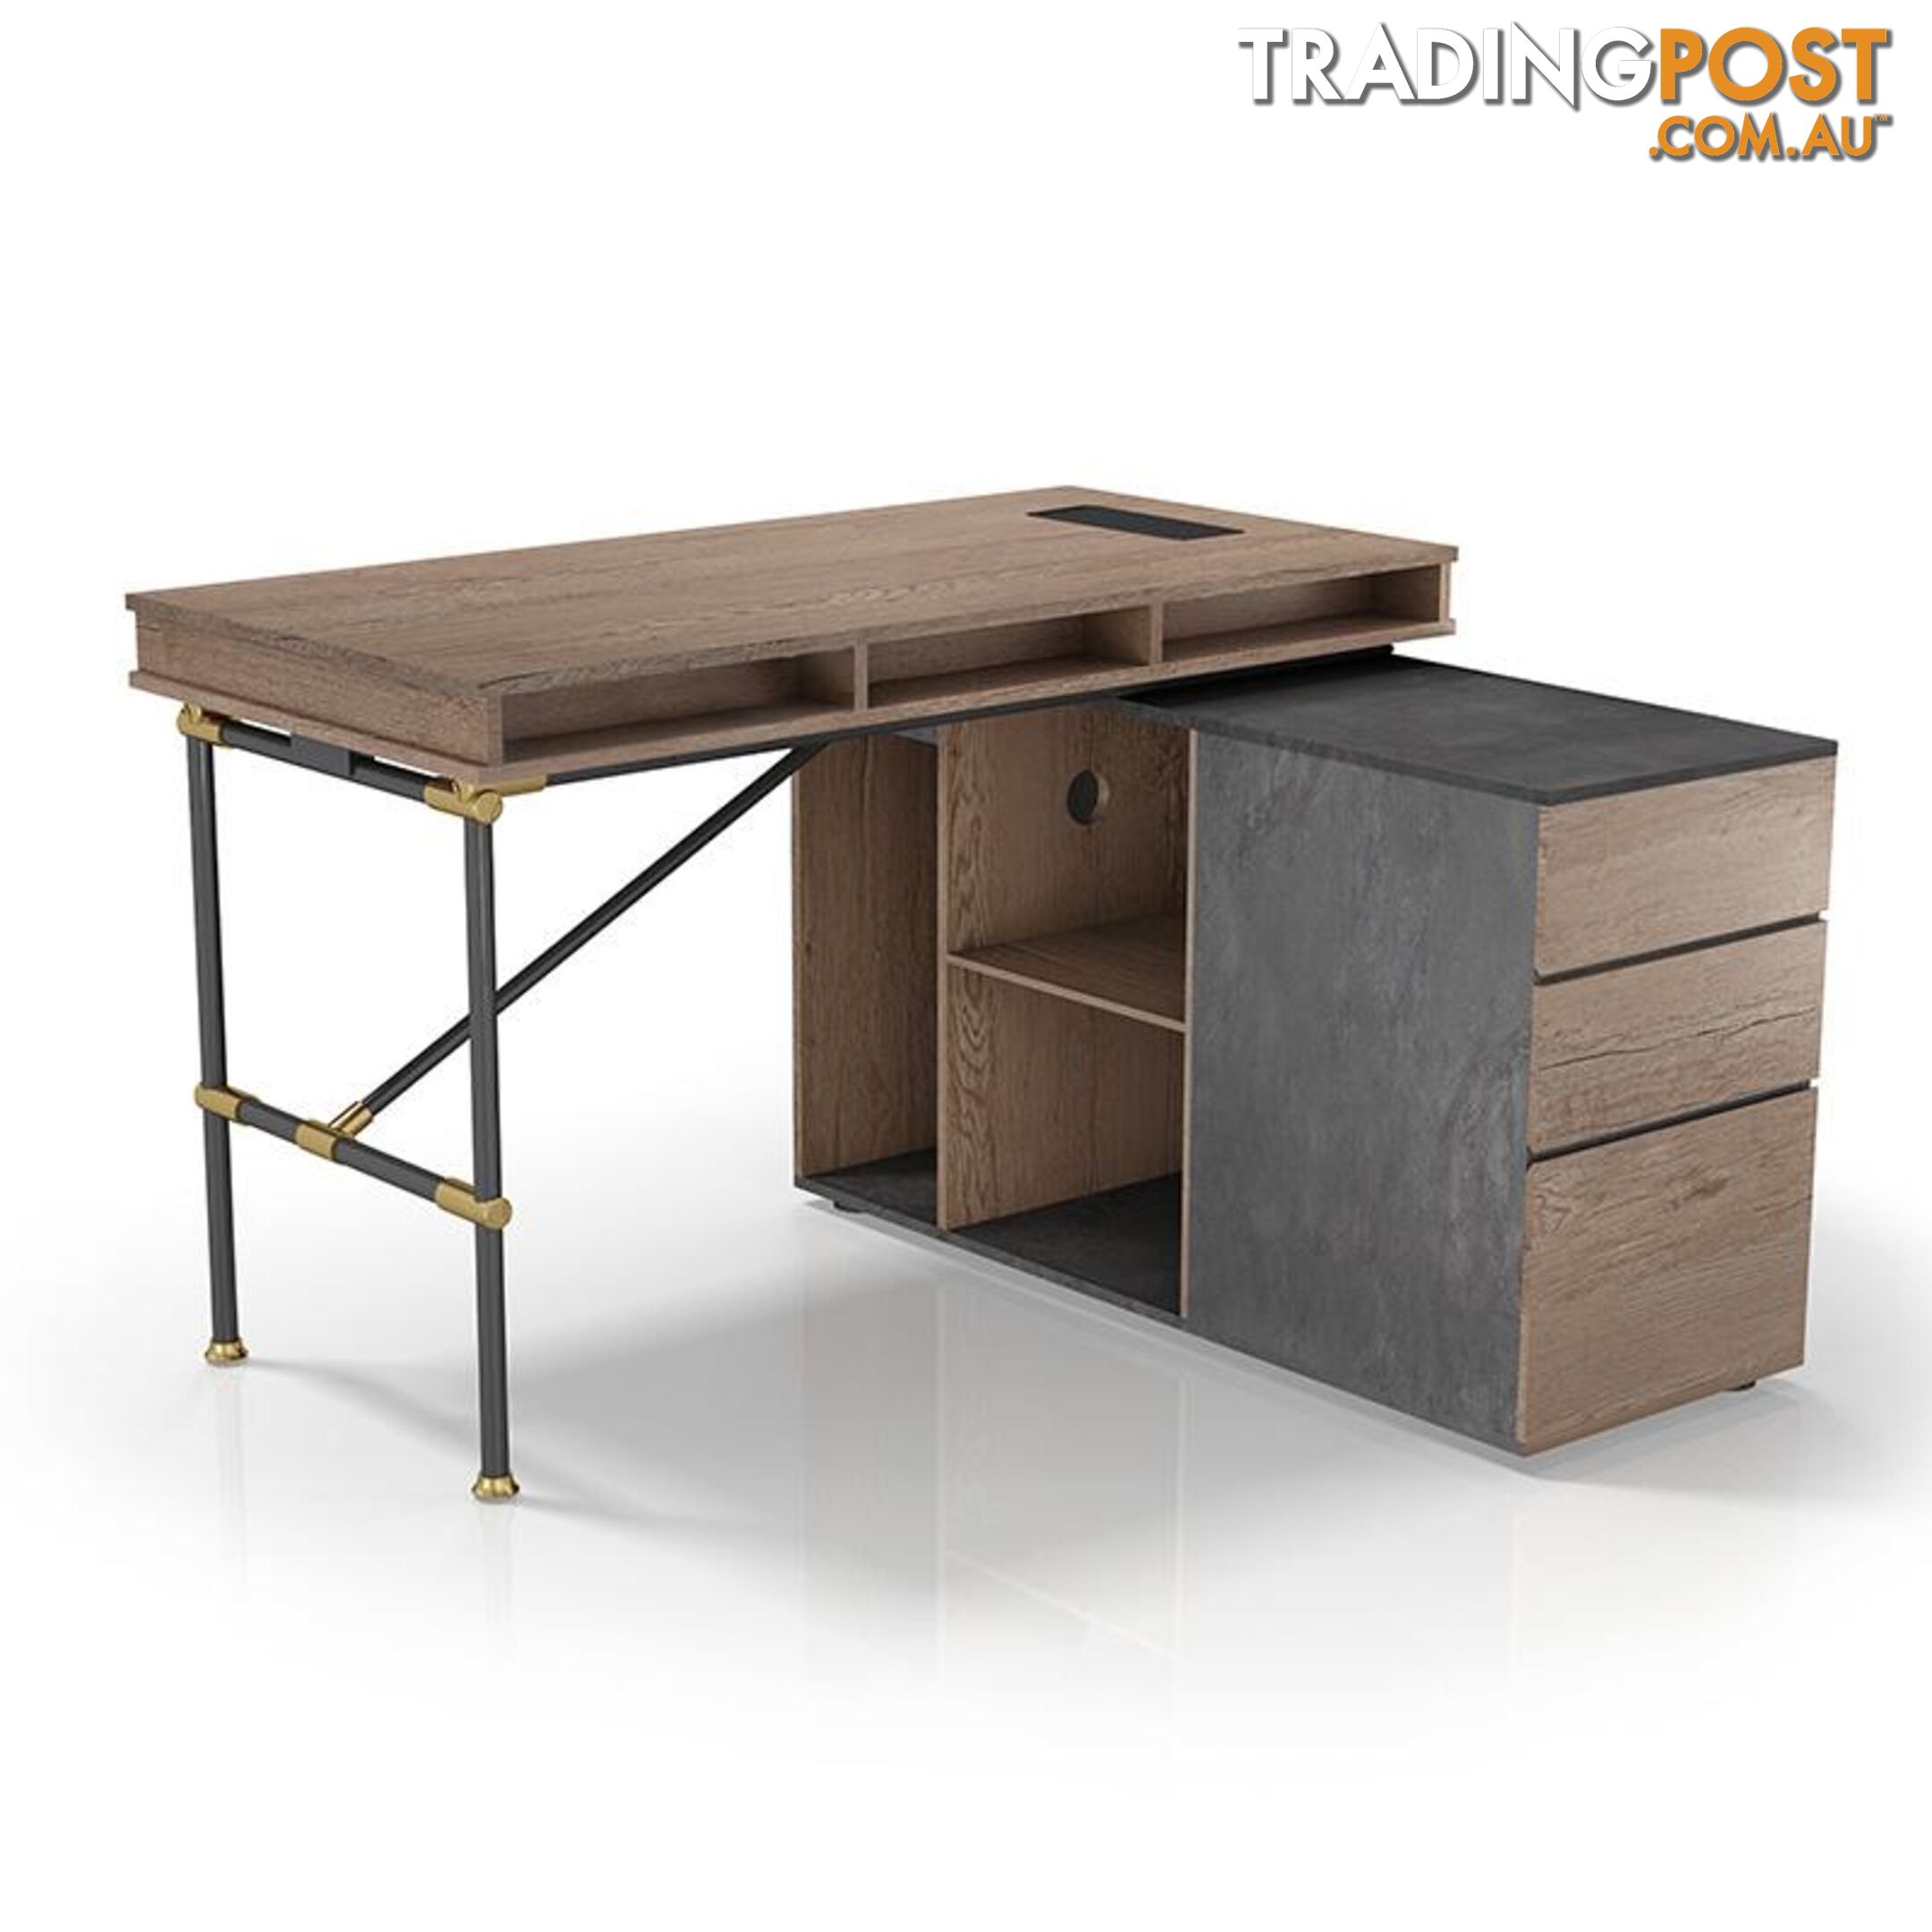 PARKER  Executive Office Desk  with Right Return 1.4M - Tobacco - WF-PW002B-R - 9334719004402